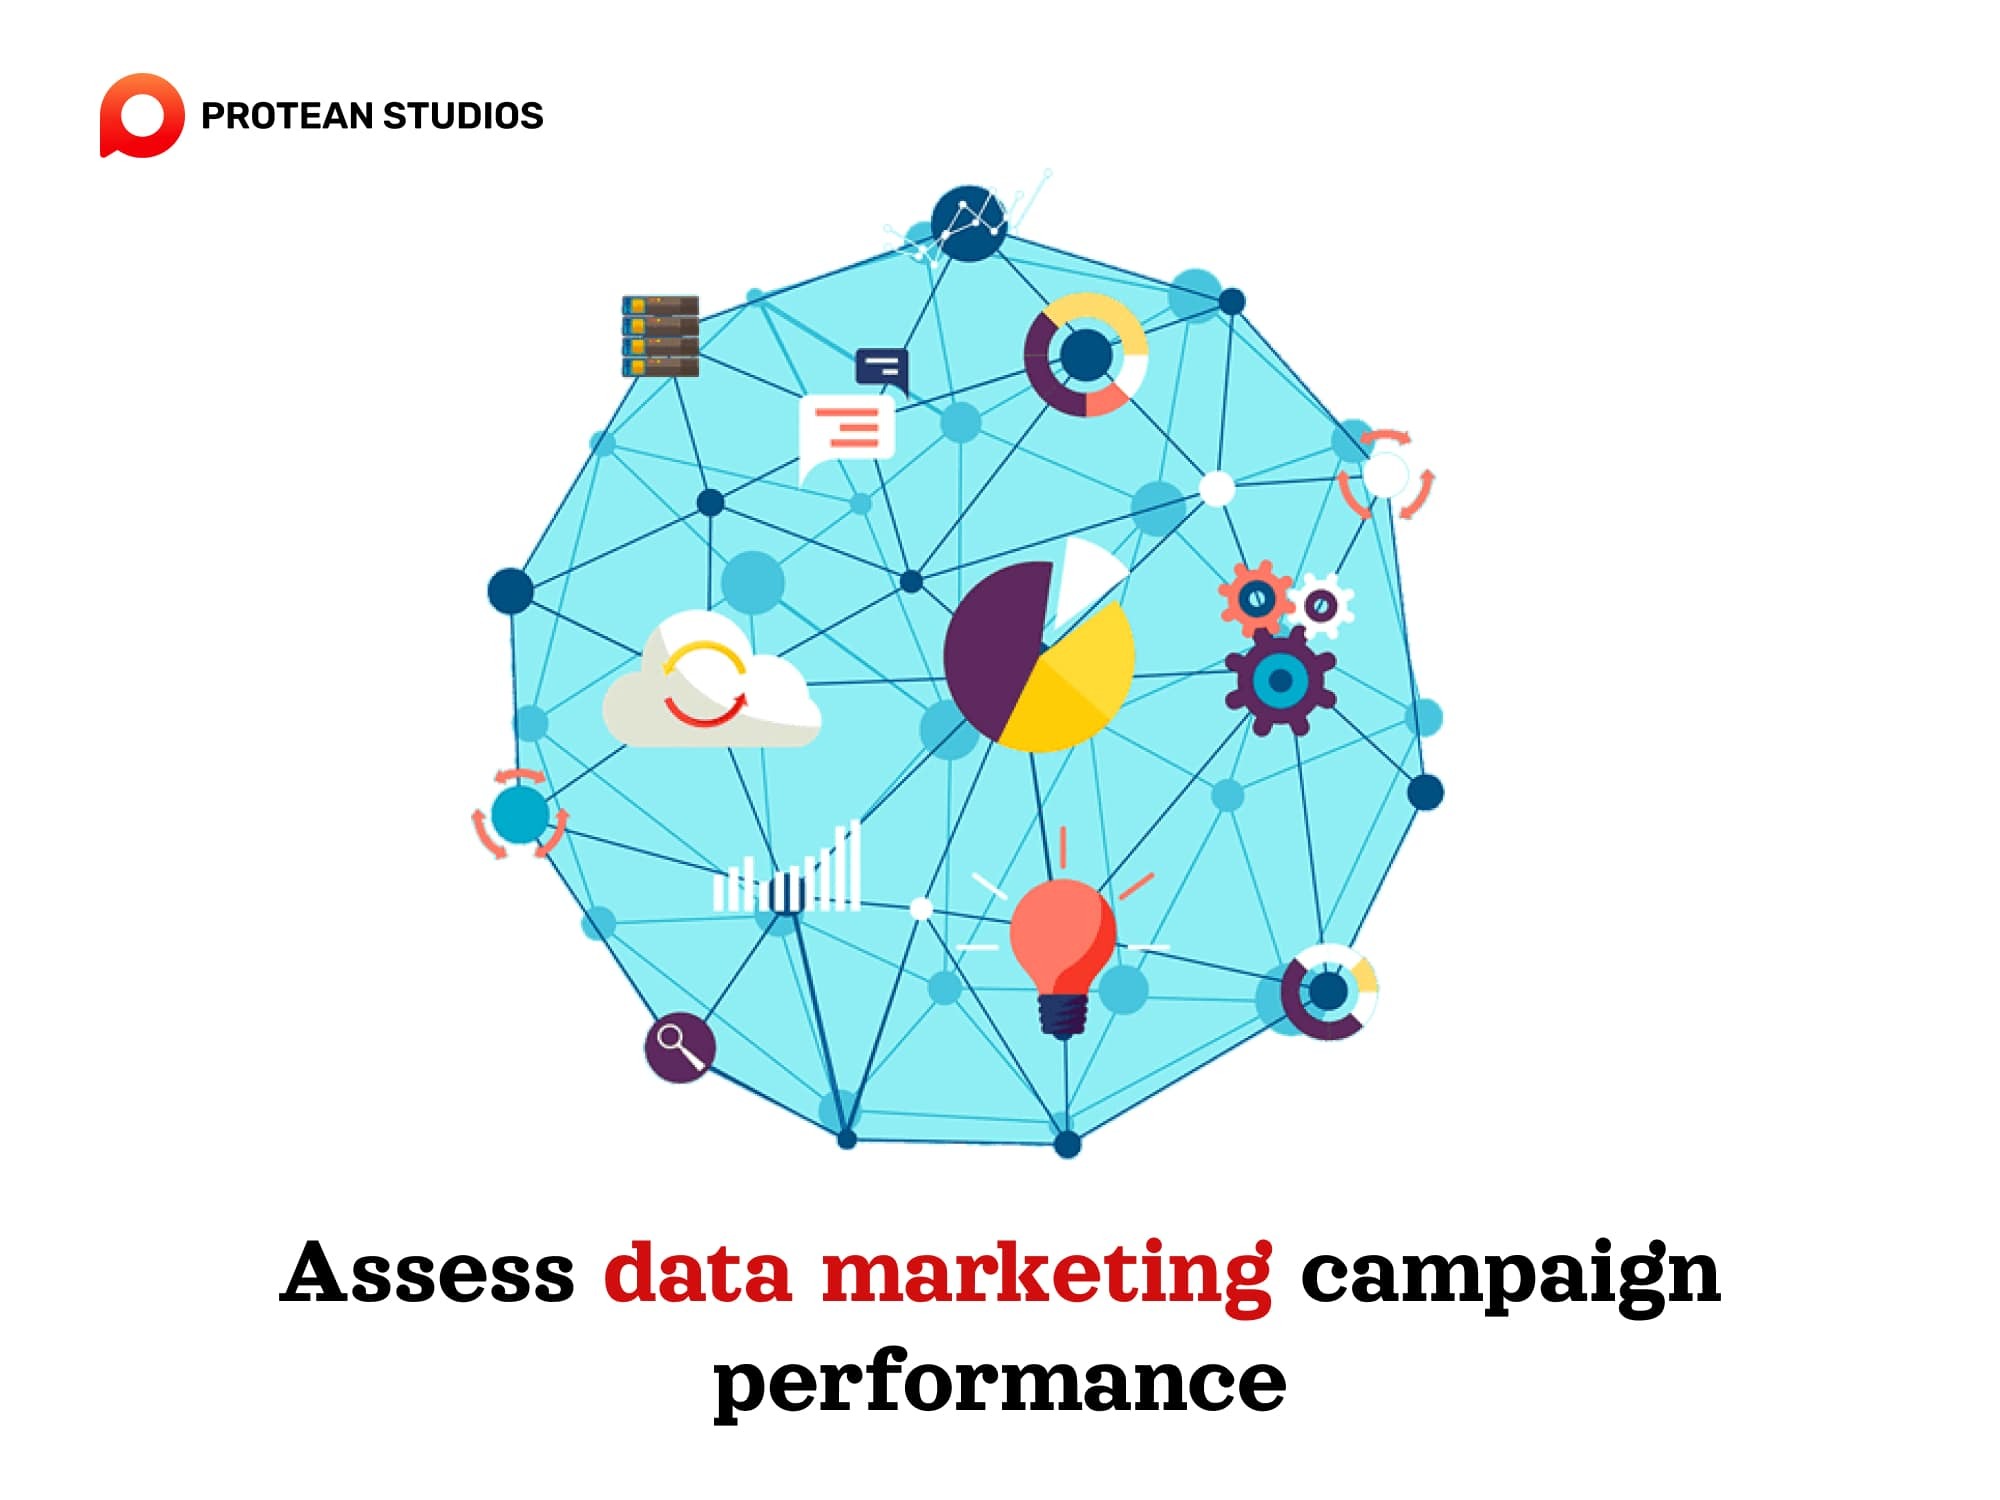 Monitoring the marketing campaign performance